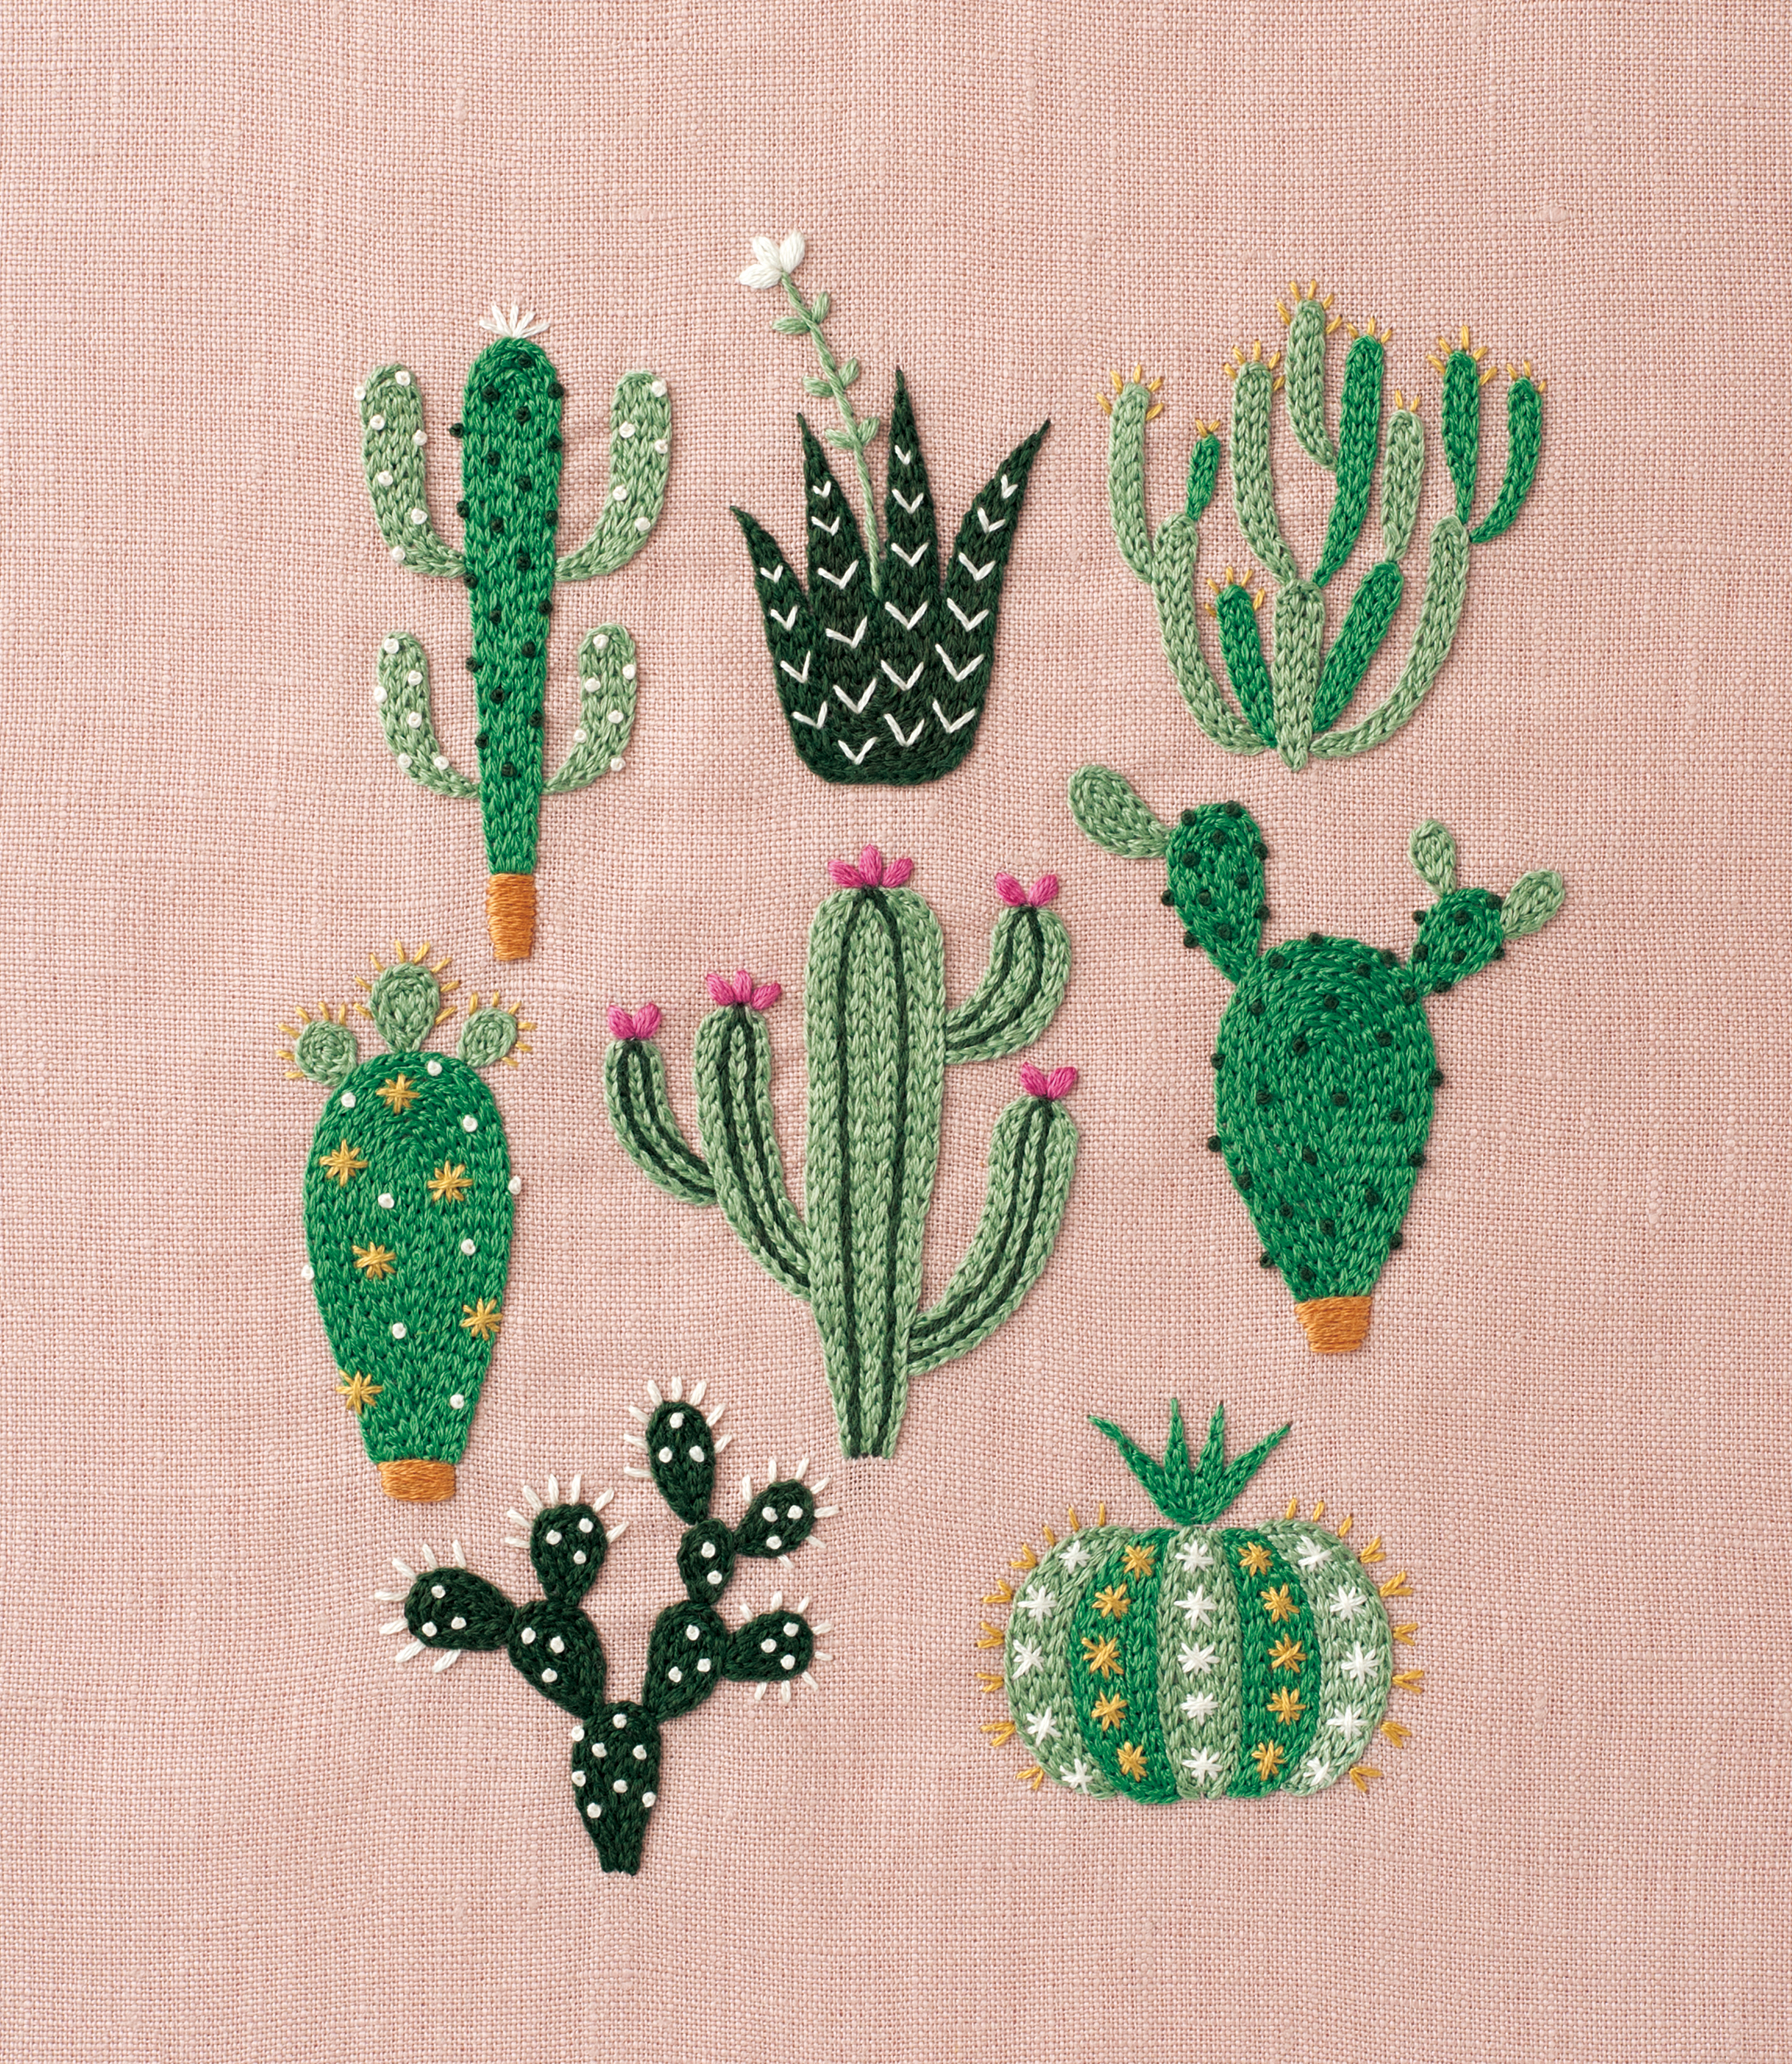 Beginner Embroidery Patterns Diy Floral Cactus Embroidery Projects From A Year Of Embroidery